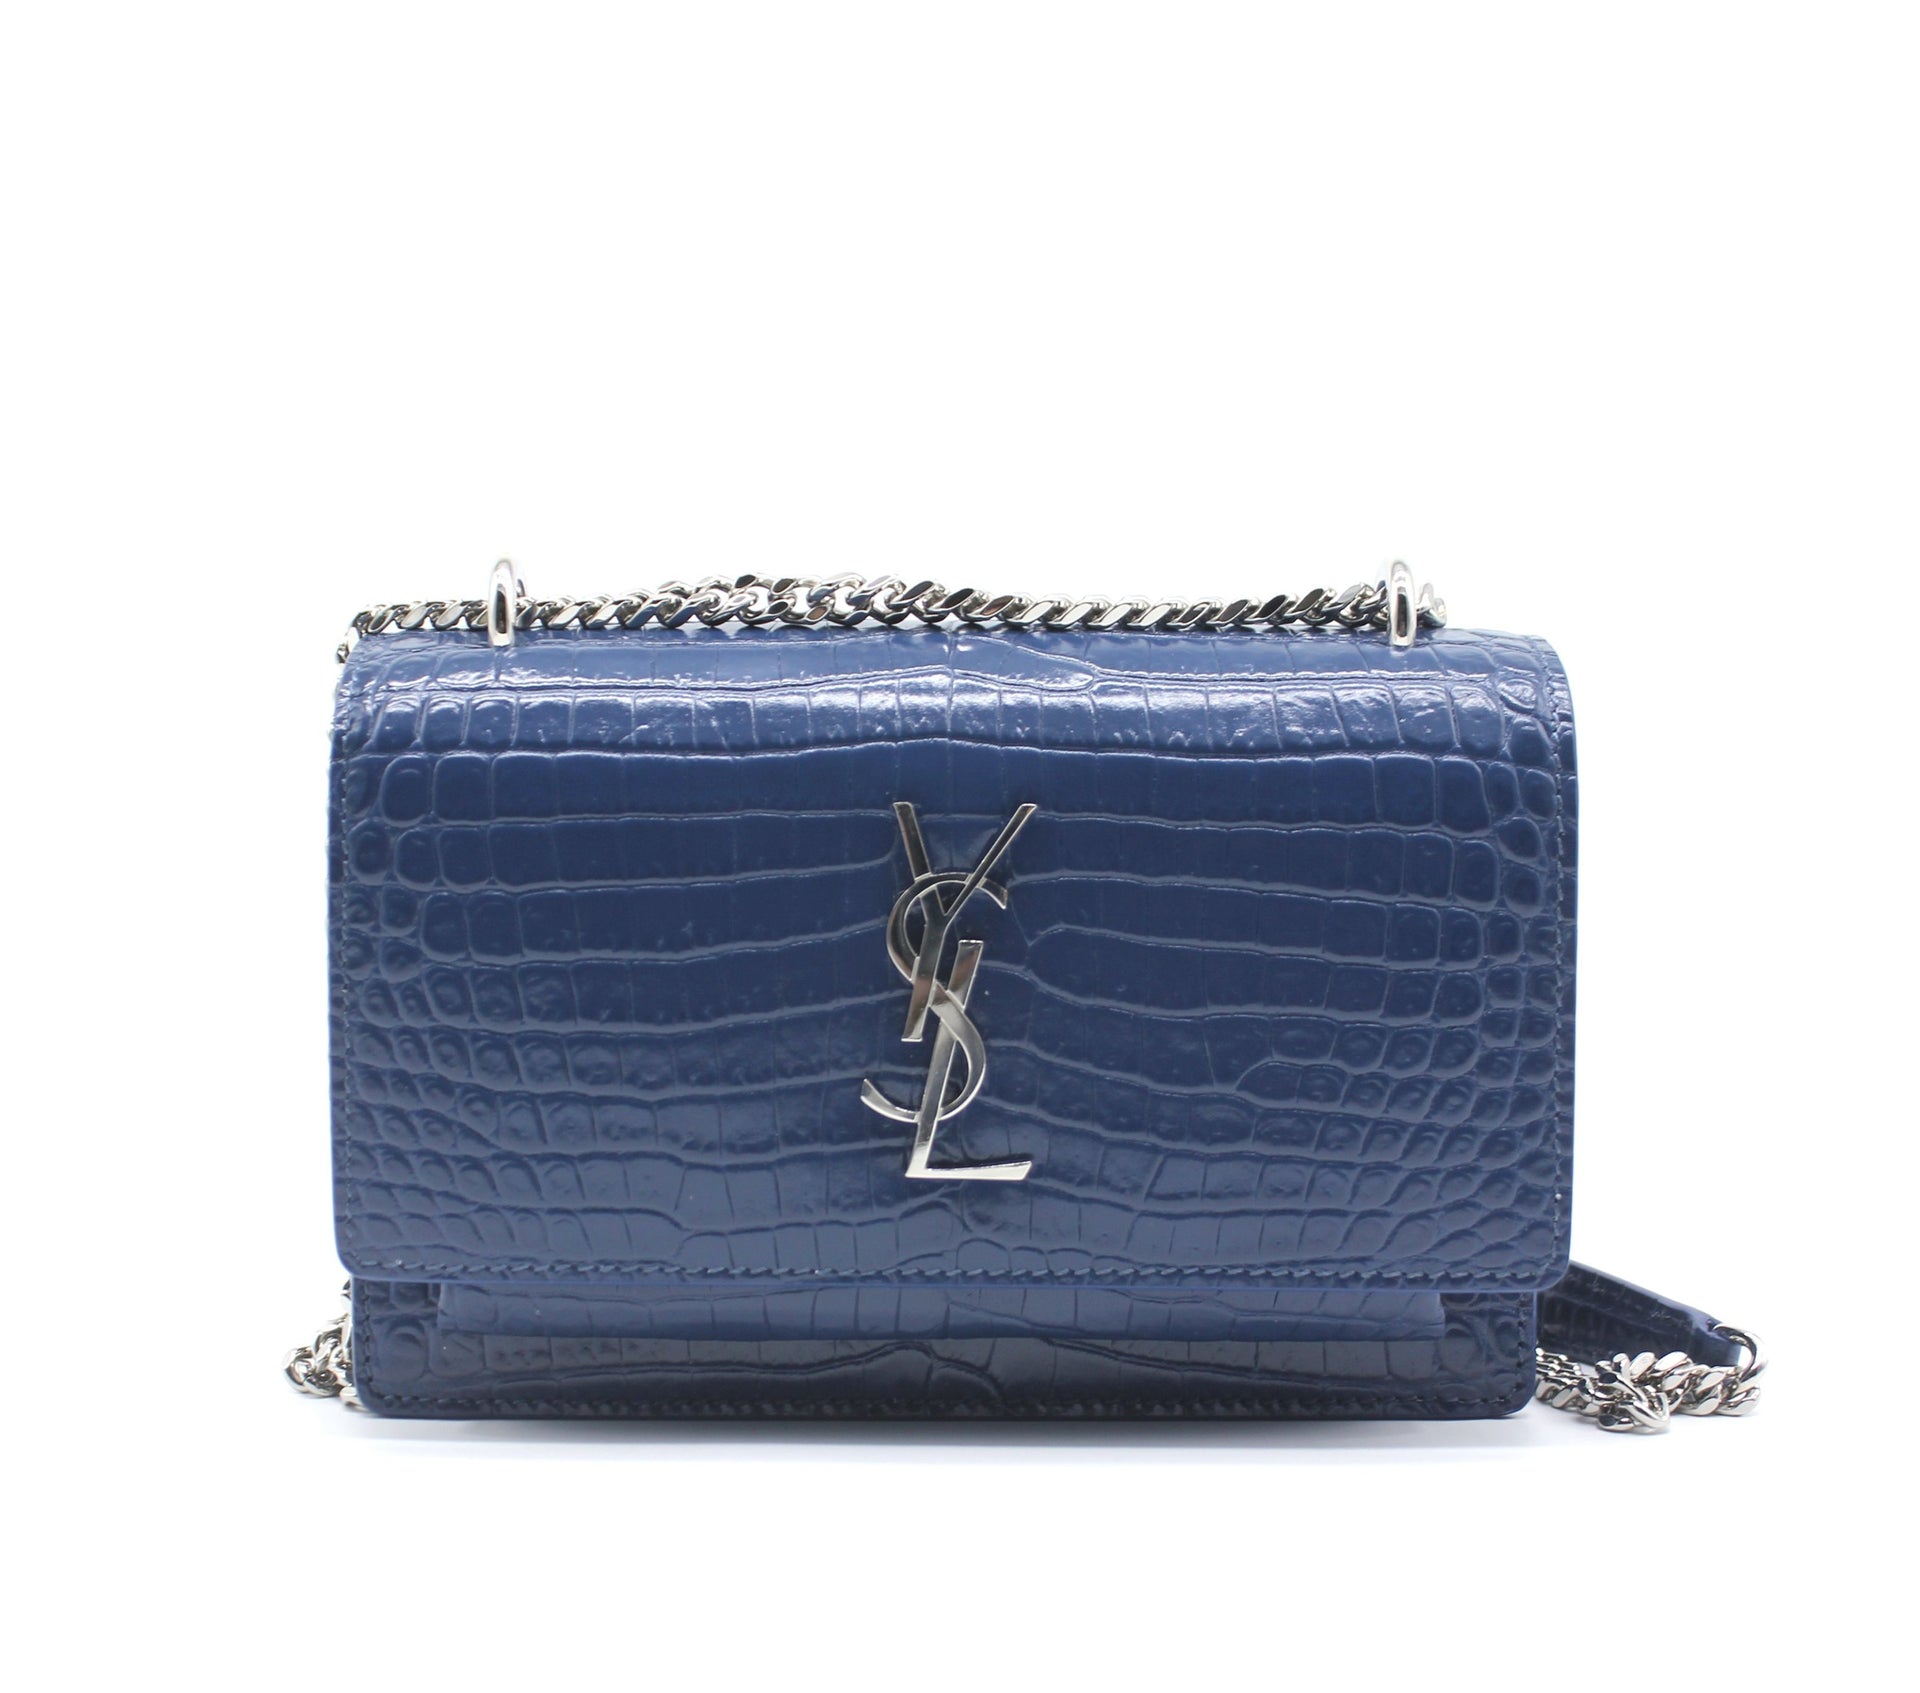 YSL Sunset Chain Wallet in Crocodile Embossed Leather w/ Crossbody Chain  Strap